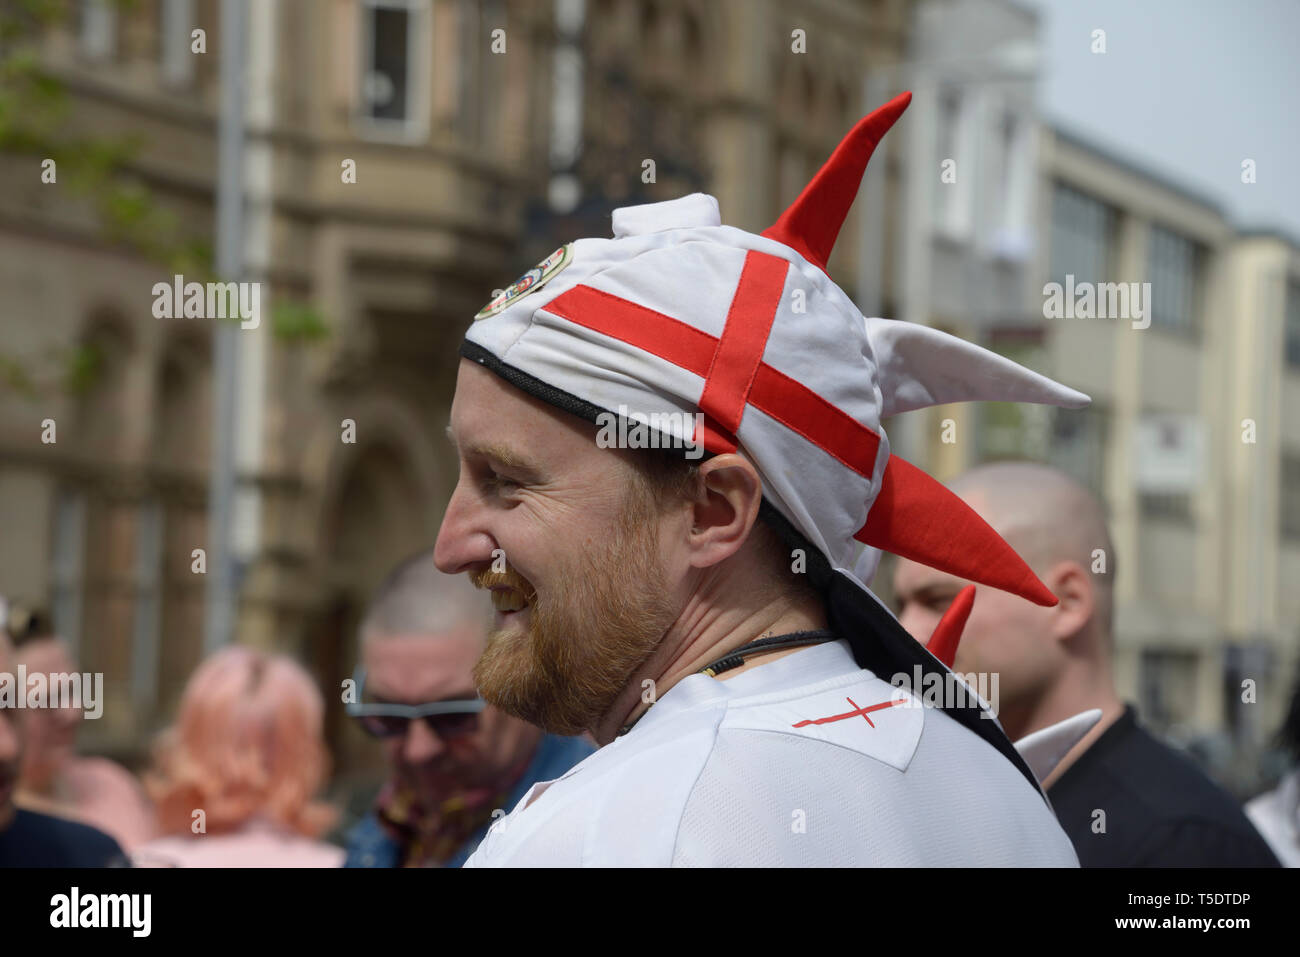 Man with Red & white headgear, at St. George's Day celebration, Nottingham, England. Stock Photo